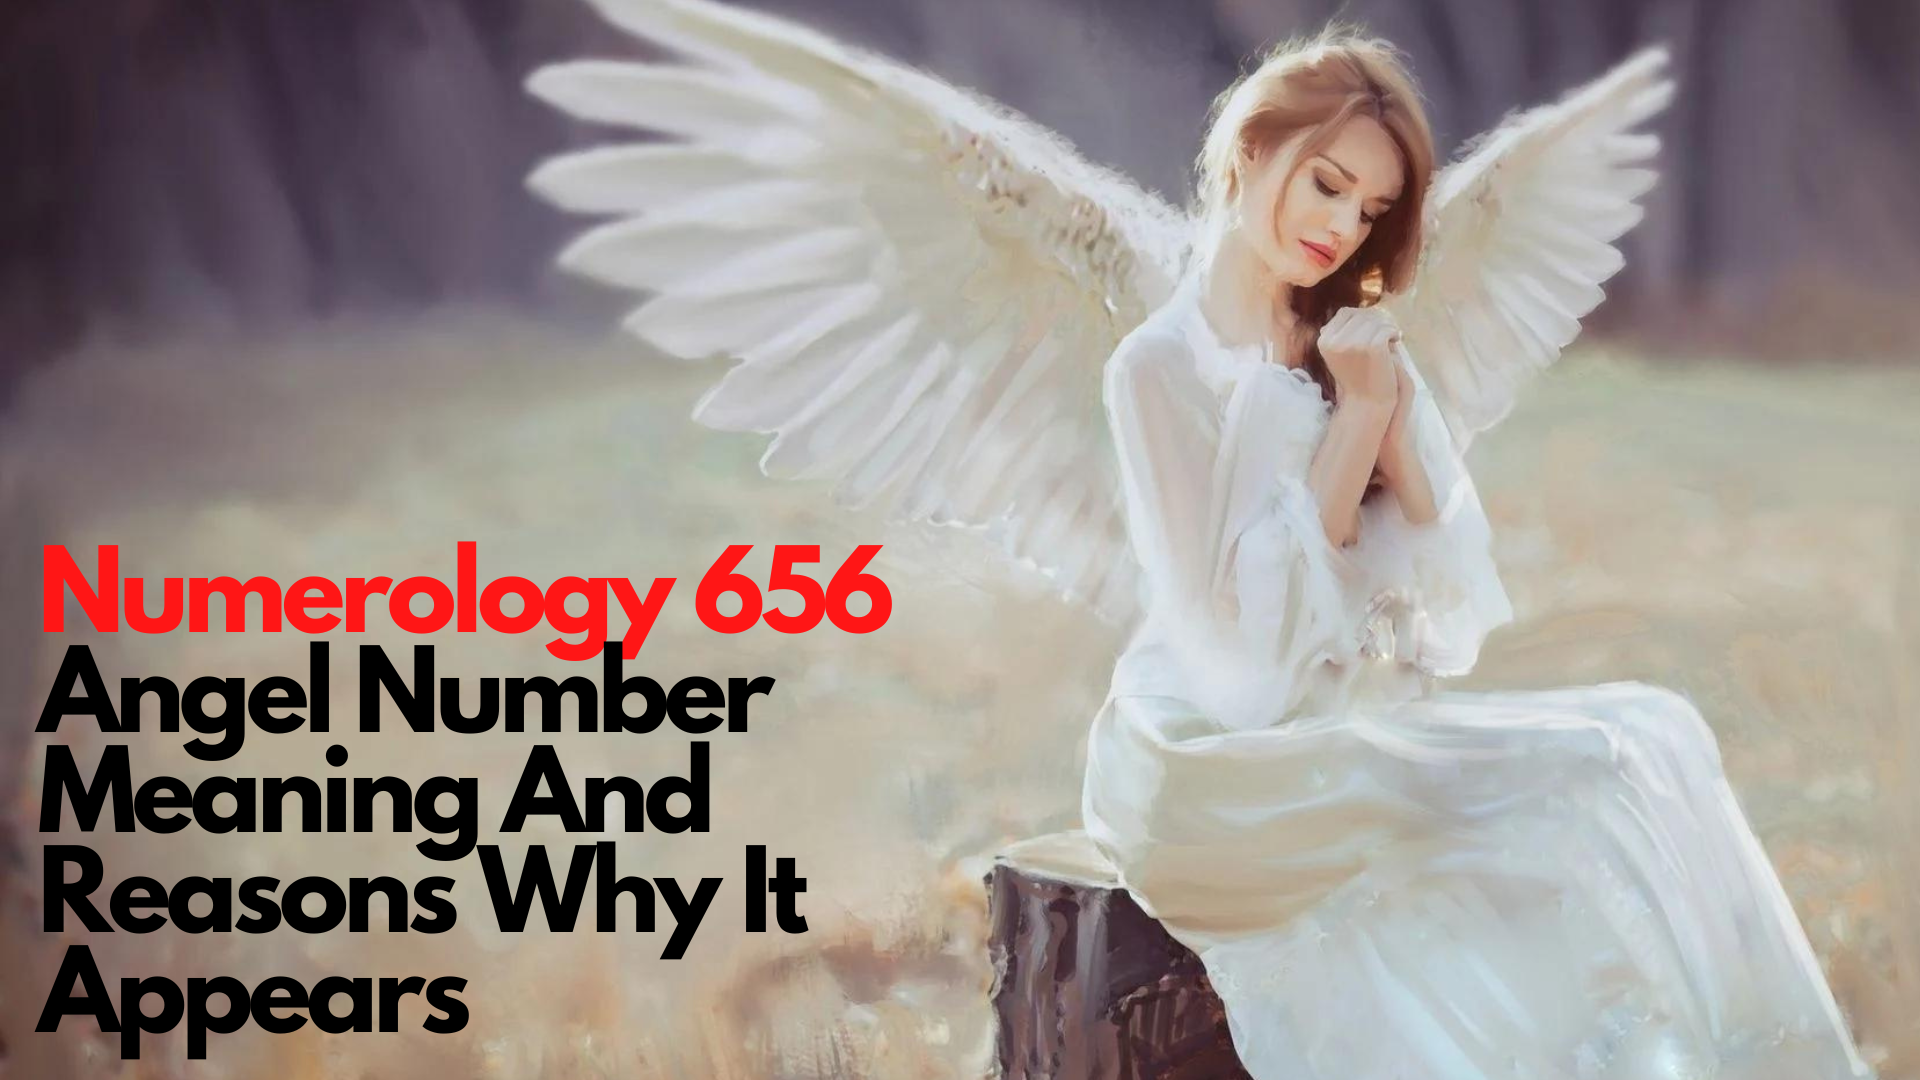 Numerology 656 Angel Number Meaning And Reasons Why It Appears